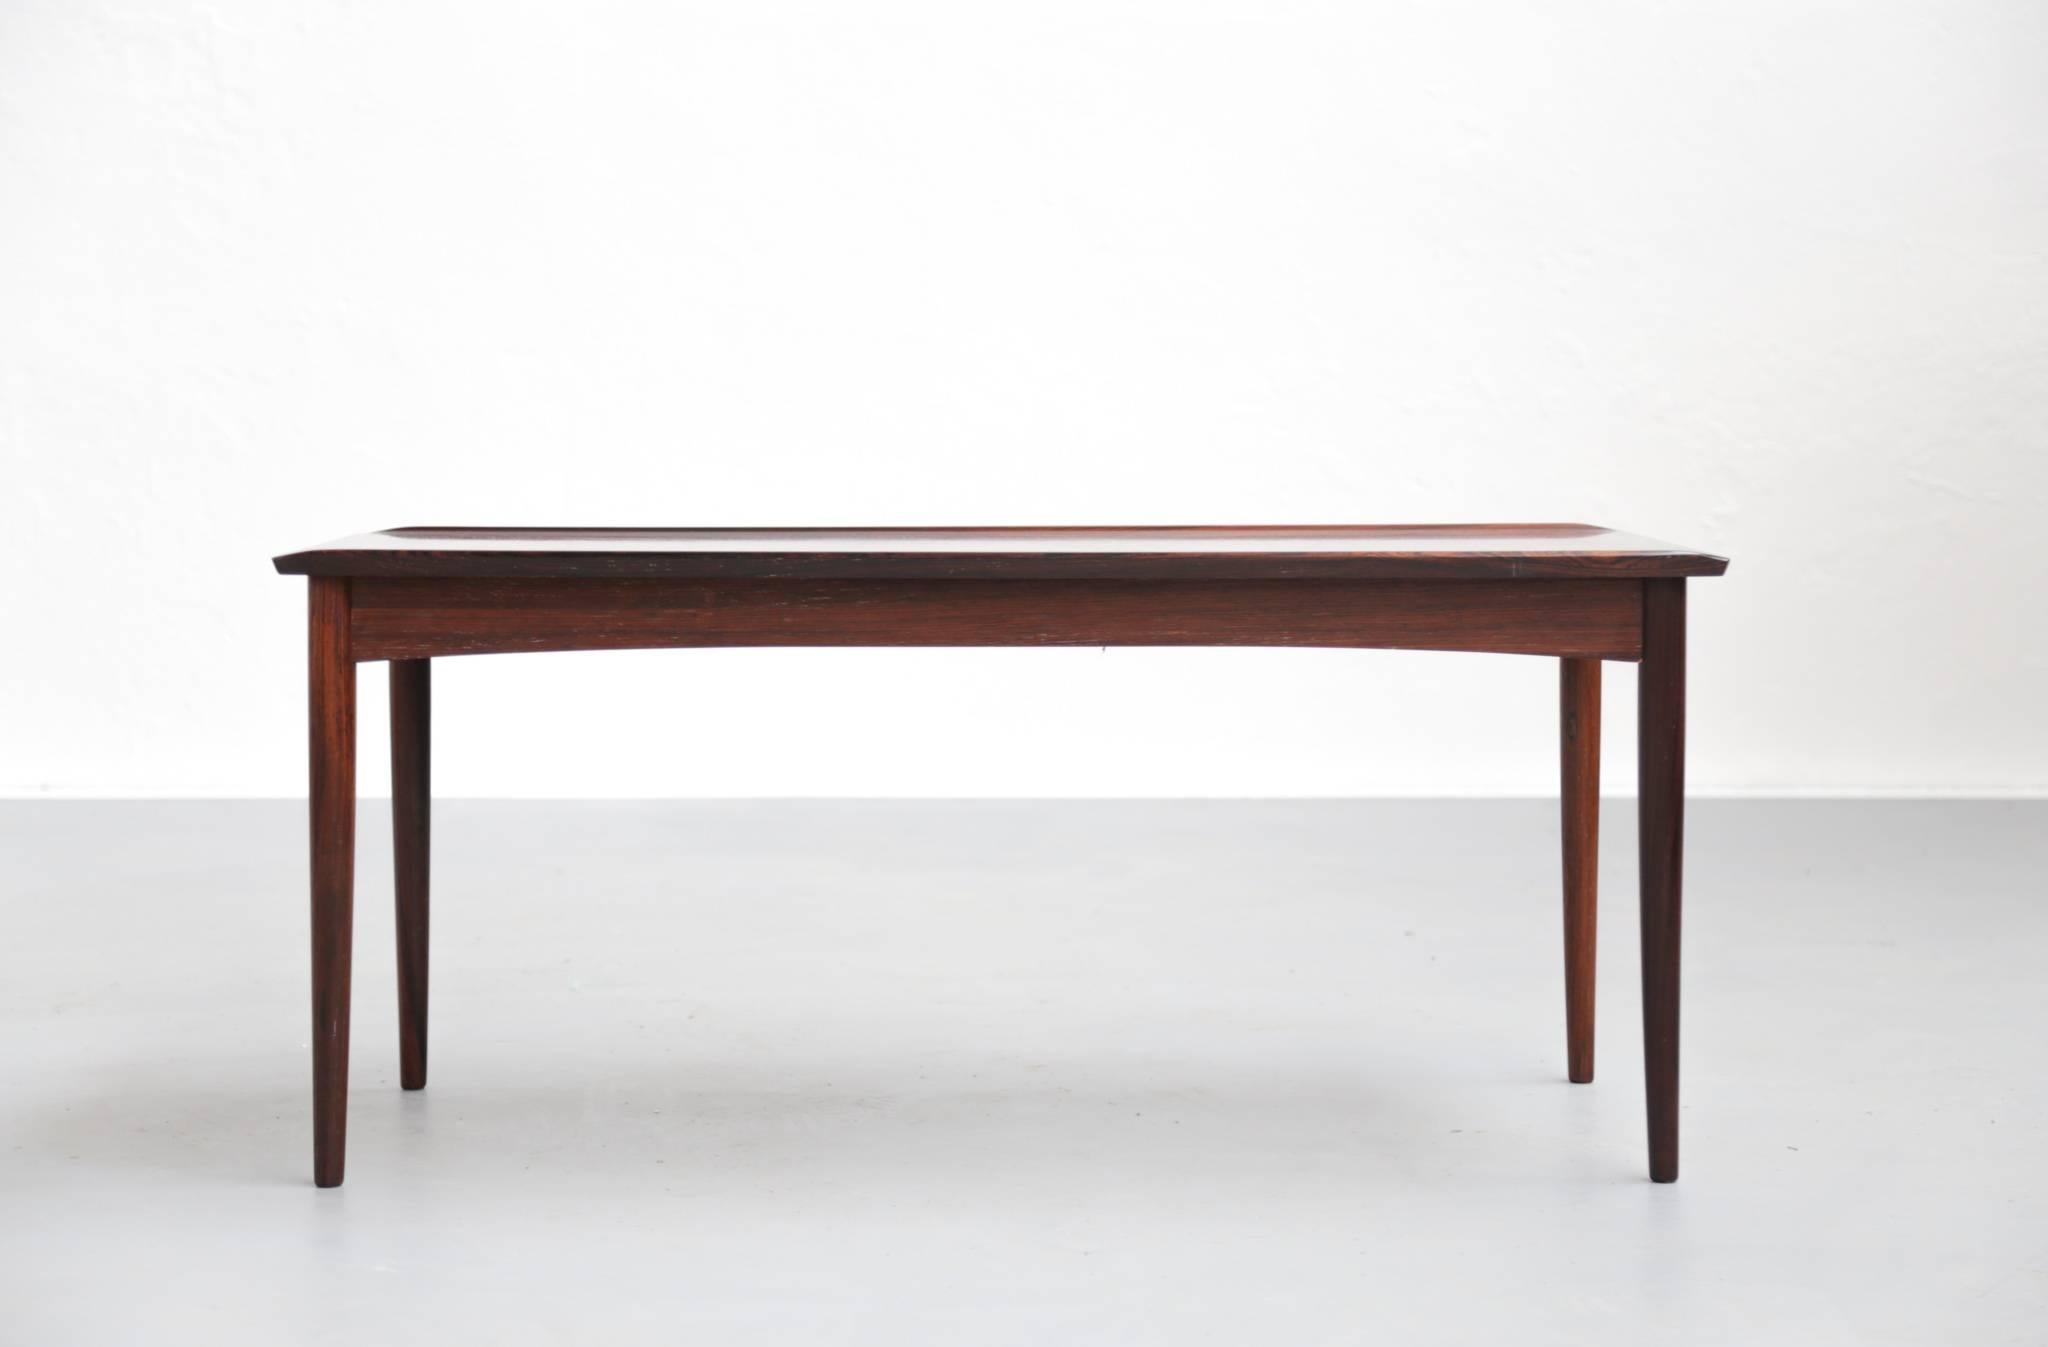 Sofa or coffee table, Scandinavian style.
Made of Rio rosewood.